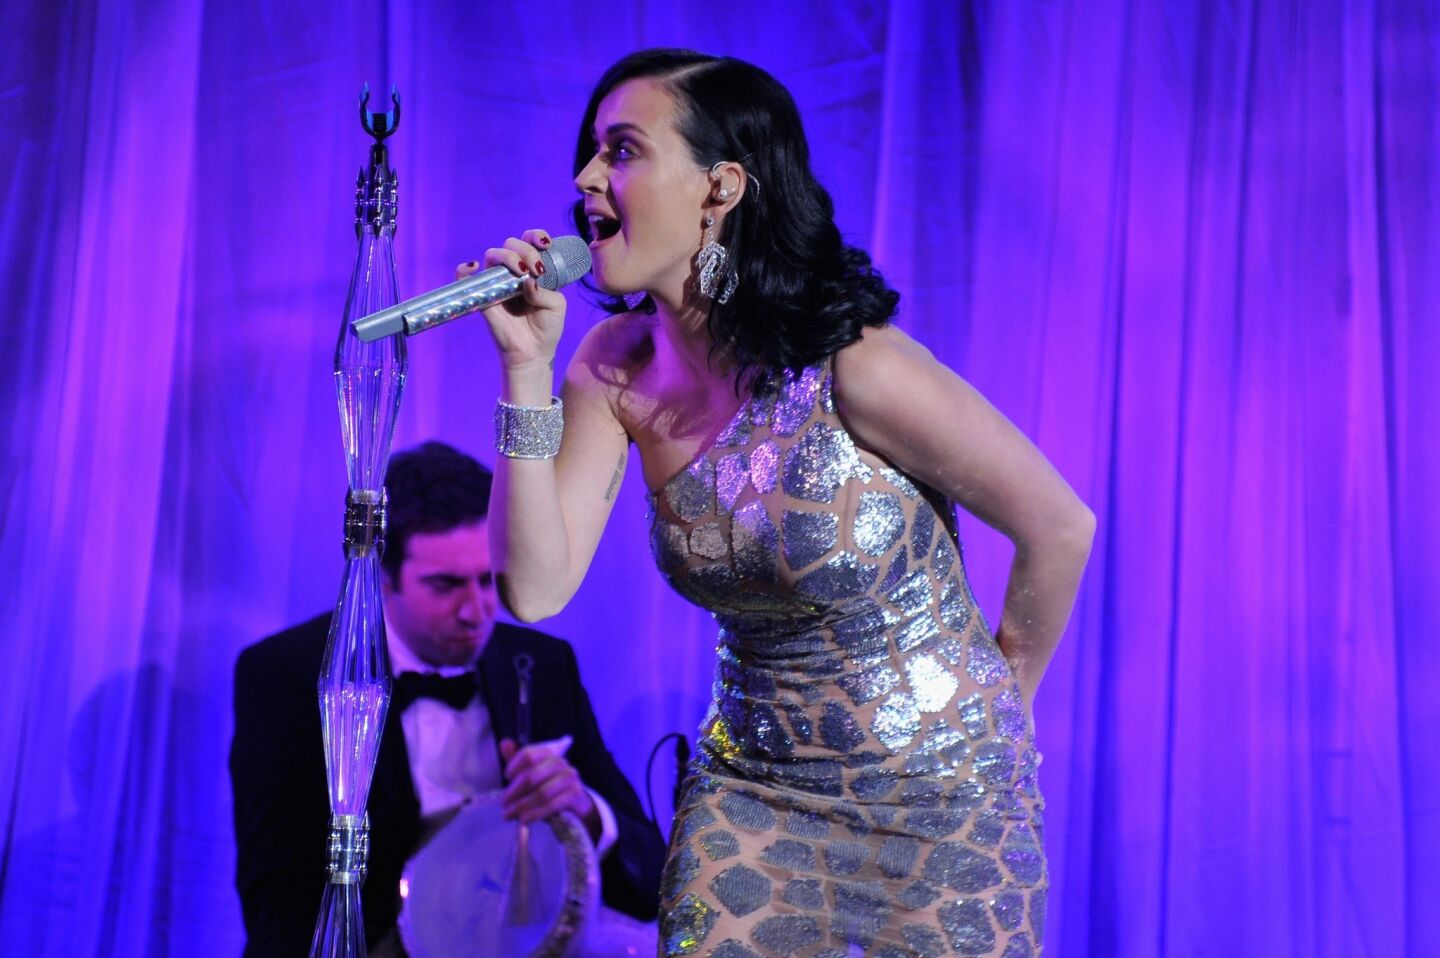 Katy Perry sings for a good cause at the UNICEF Snowflake Ball in New York City.